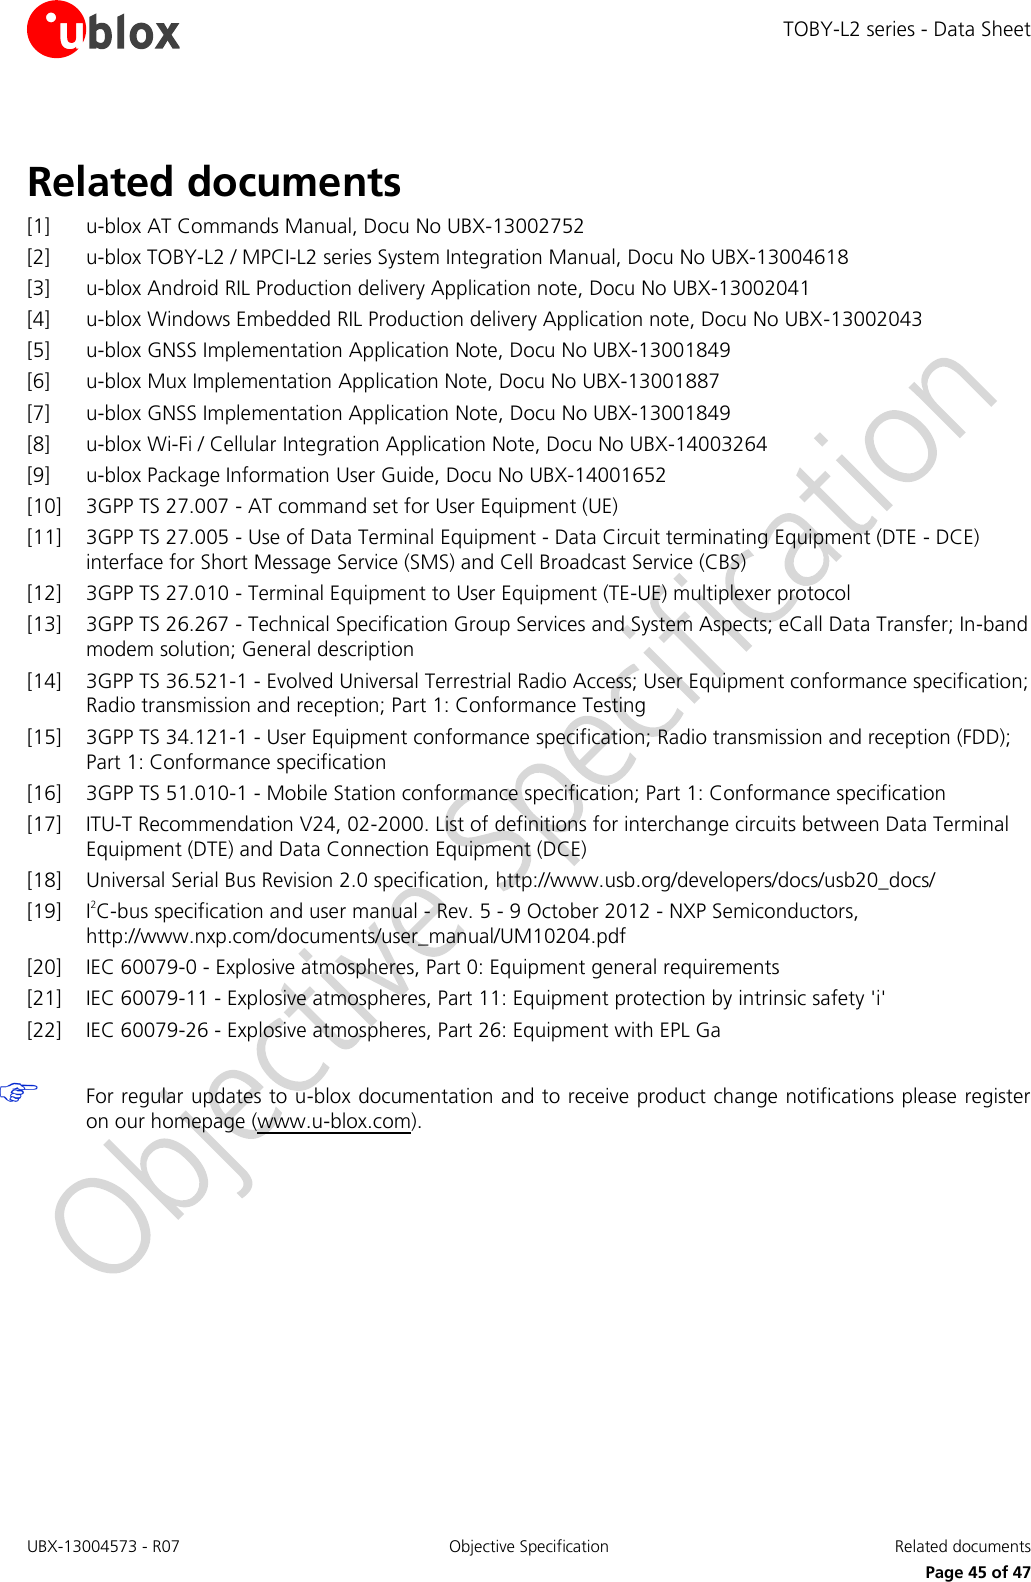 TOBY-L2 series - Data Sheet UBX-13004573 - R07  Objective Specification  Related documents   Page 45 of 47 Related documents [1] u-blox AT Commands Manual, Docu No UBX-13002752 [2] u-blox TOBY-L2 / MPCI-L2 series System Integration Manual, Docu No UBX-13004618 [3] u-blox Android RIL Production delivery Application note, Docu No UBX-13002041 [4] u-blox Windows Embedded RIL Production delivery Application note, Docu No UBX-13002043 [5] u-blox GNSS Implementation Application Note, Docu No UBX-13001849  [6] u-blox Mux Implementation Application Note, Docu No UBX-13001887 [7] u-blox GNSS Implementation Application Note, Docu No UBX-13001849 [8] u-blox Wi-Fi / Cellular Integration Application Note, Docu No UBX-14003264 [9] u-blox Package Information User Guide, Docu No UBX-14001652 [10] 3GPP TS 27.007 - AT command set for User Equipment (UE)  [11] 3GPP TS 27.005 - Use of Data Terminal Equipment - Data Circuit terminating Equipment (DTE - DCE) interface for Short Message Service (SMS) and Cell Broadcast Service (CBS)  [12] 3GPP TS 27.010 - Terminal Equipment to User Equipment (TE-UE) multiplexer protocol [13] 3GPP TS 26.267 - Technical Specification Group Services and System Aspects; eCall Data Transfer; In-band modem solution; General description  [14] 3GPP TS 36.521-1 - Evolved Universal Terrestrial Radio Access; User Equipment conformance specification; Radio transmission and reception; Part 1: Conformance Testing [15] 3GPP TS 34.121-1 - User Equipment conformance specification; Radio transmission and reception (FDD); Part 1: Conformance specification [16] 3GPP TS 51.010-1 - Mobile Station conformance specification; Part 1: Conformance specification [17] ITU-T Recommendation V24, 02-2000. List of definitions for interchange circuits between Data Terminal Equipment (DTE) and Data Connection Equipment (DCE) [18] Universal Serial Bus Revision 2.0 specification, http://www.usb.org/developers/docs/usb20_docs/ [19] I2C-bus specification and user manual - Rev. 5 - 9 October 2012 - NXP Semiconductors, http://www.nxp.com/documents/user_manual/UM10204.pdf [20] IEC 60079-0 - Explosive atmospheres, Part 0: Equipment general requirements  [21] IEC 60079-11 - Explosive atmospheres, Part 11: Equipment protection by intrinsic safety &apos;i&apos;  [22] IEC 60079-26 - Explosive atmospheres, Part 26: Equipment with EPL Ga    For regular updates to u-blox documentation and to receive product change notifications please register on our homepage (www.u-blox.com).  